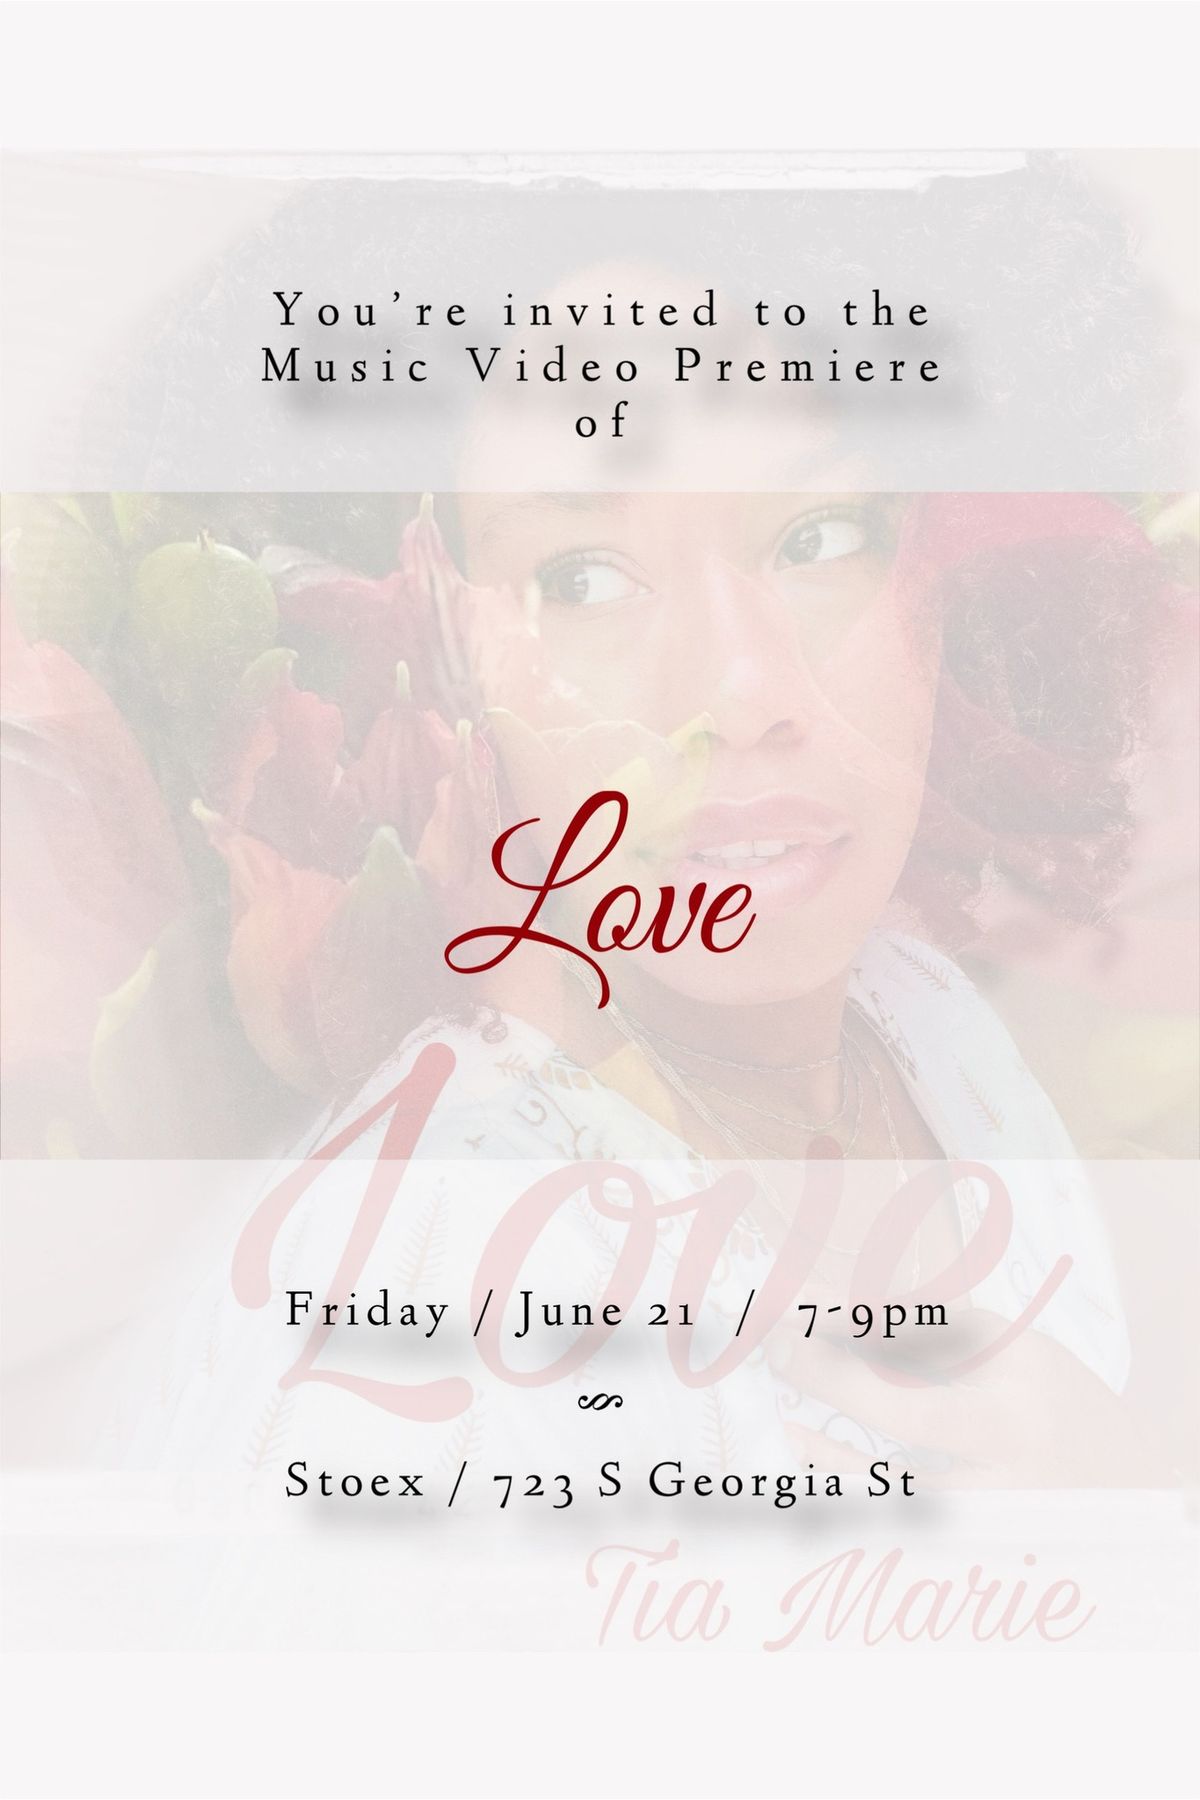 Love Music Video Release Party